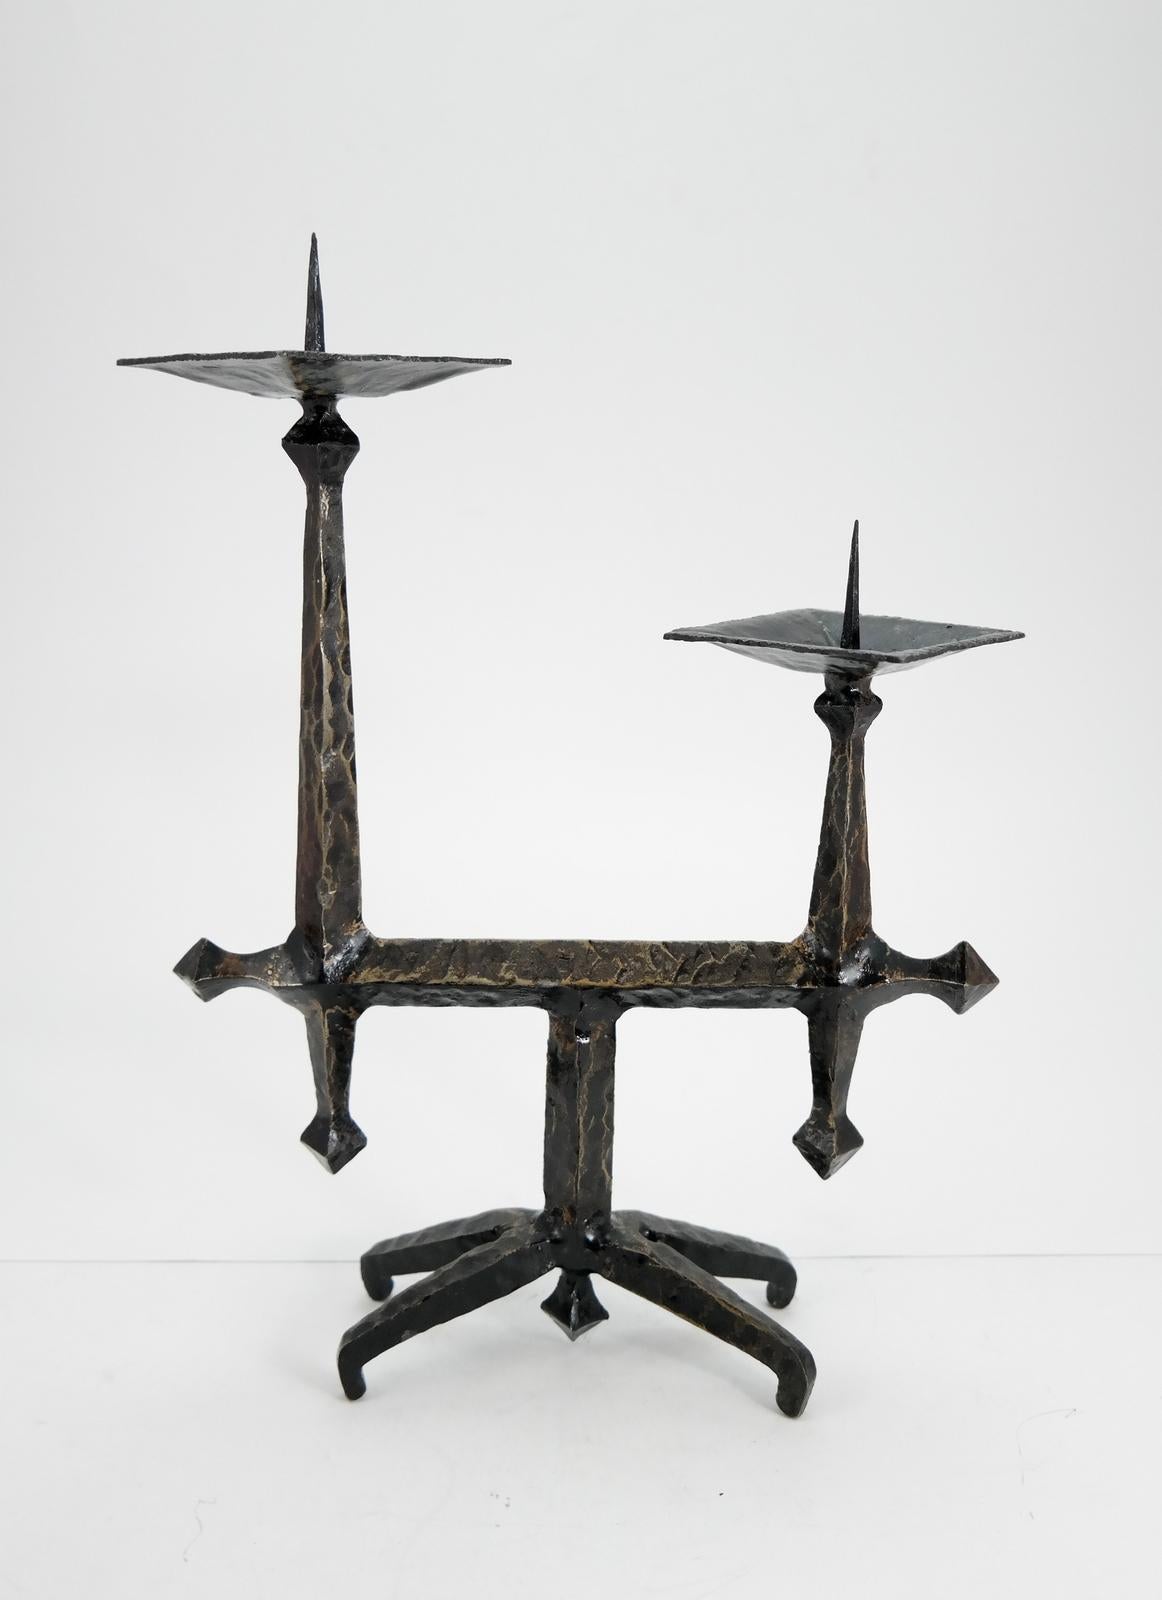 Brutalist style handcrafted wrought iron candleholder, 1960s.